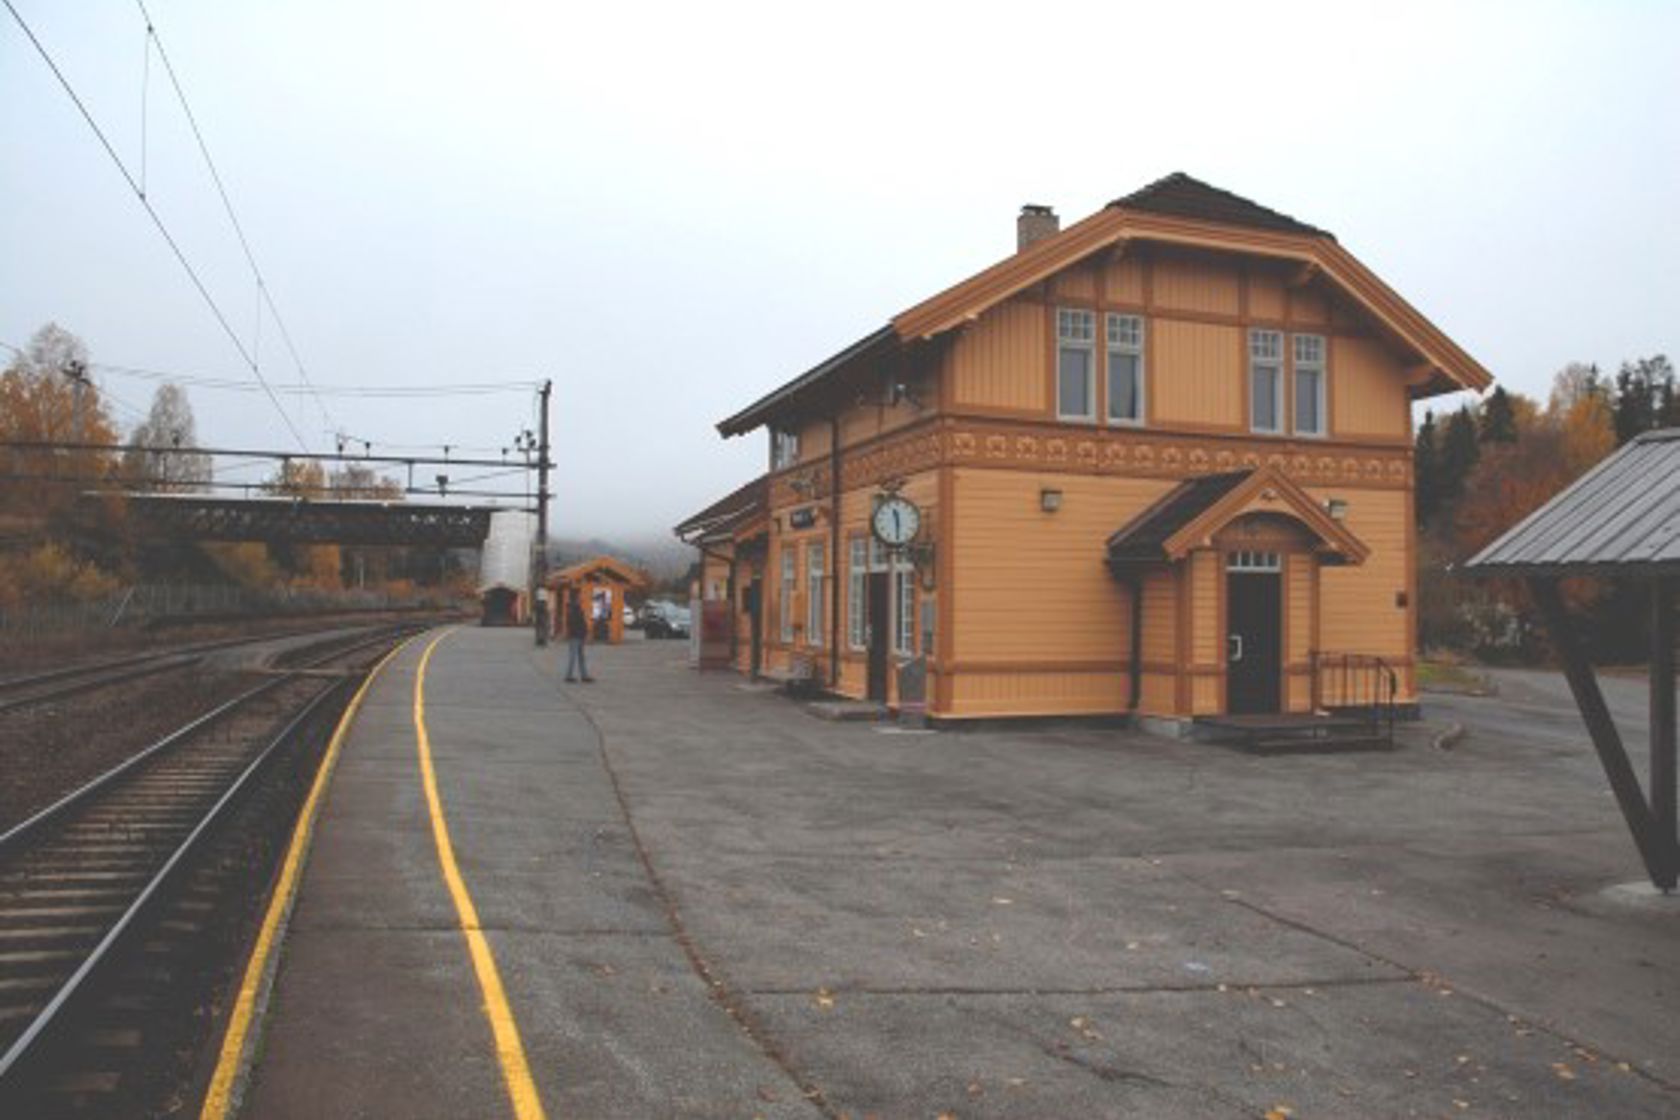 Exterior view of Nittedal station